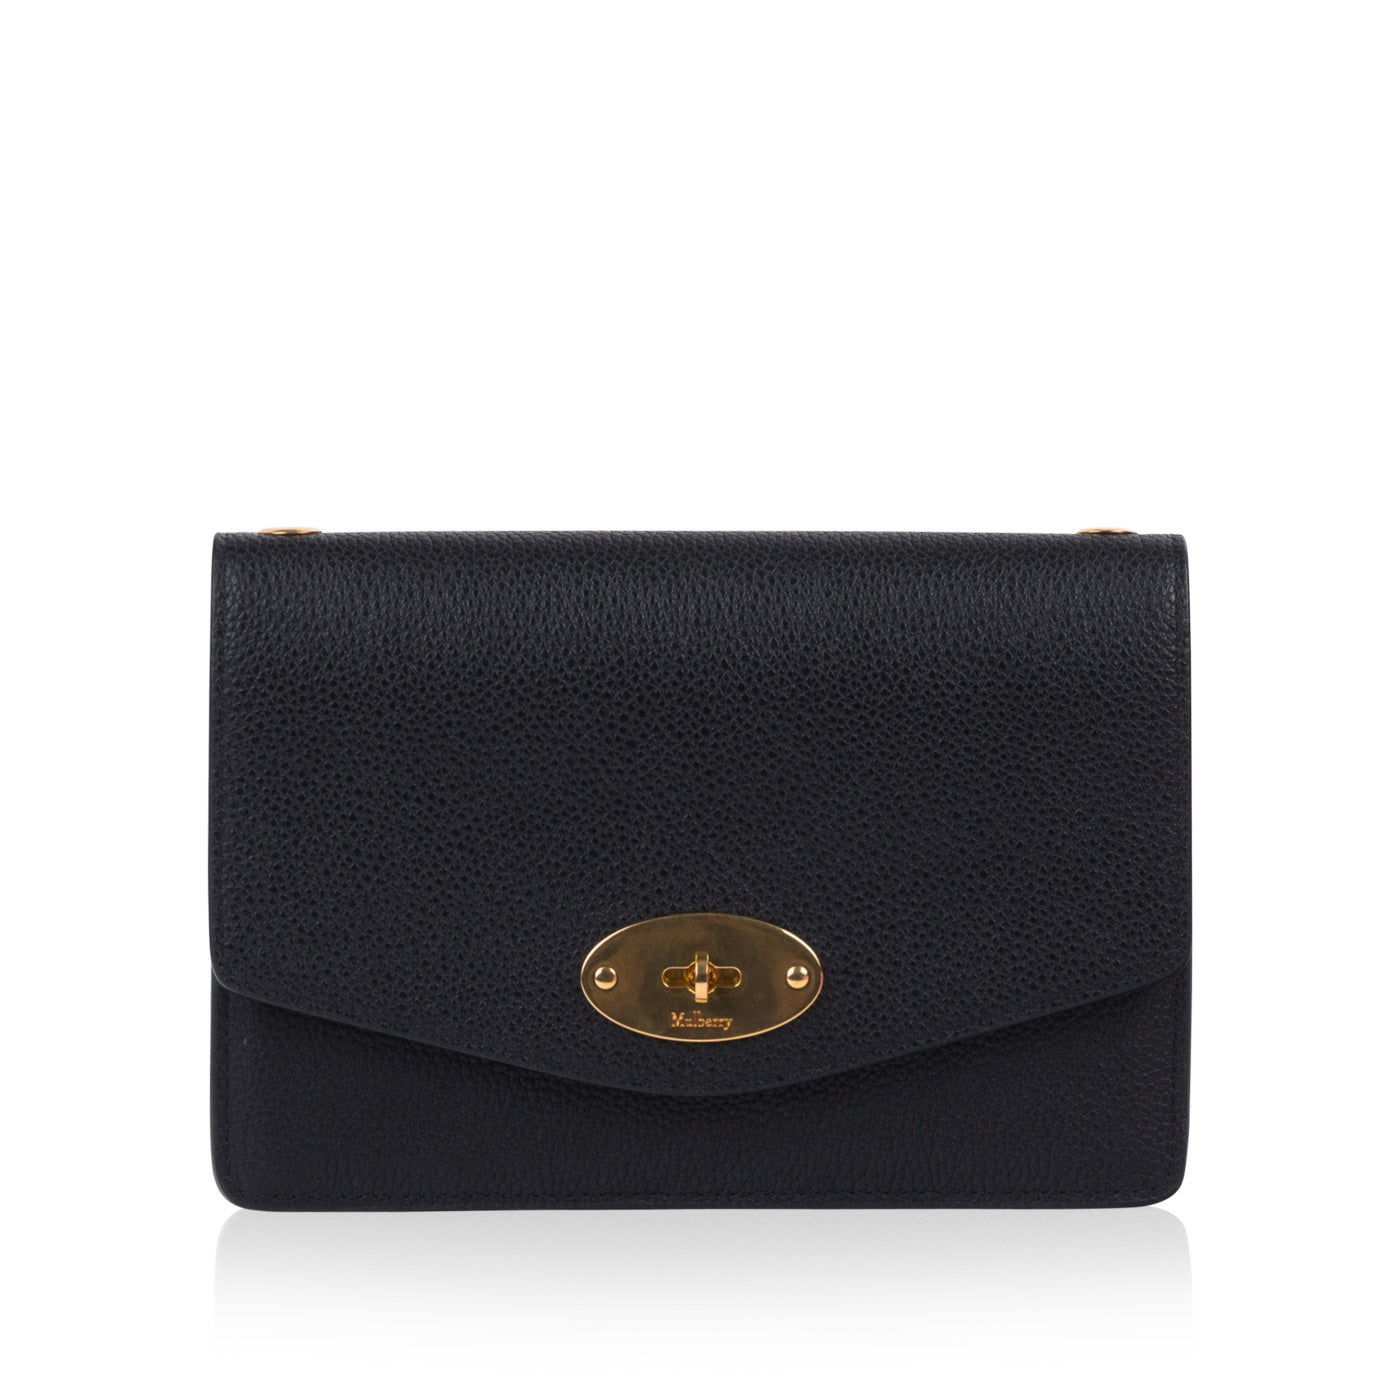 Mulberry - Small Darley | Bagista